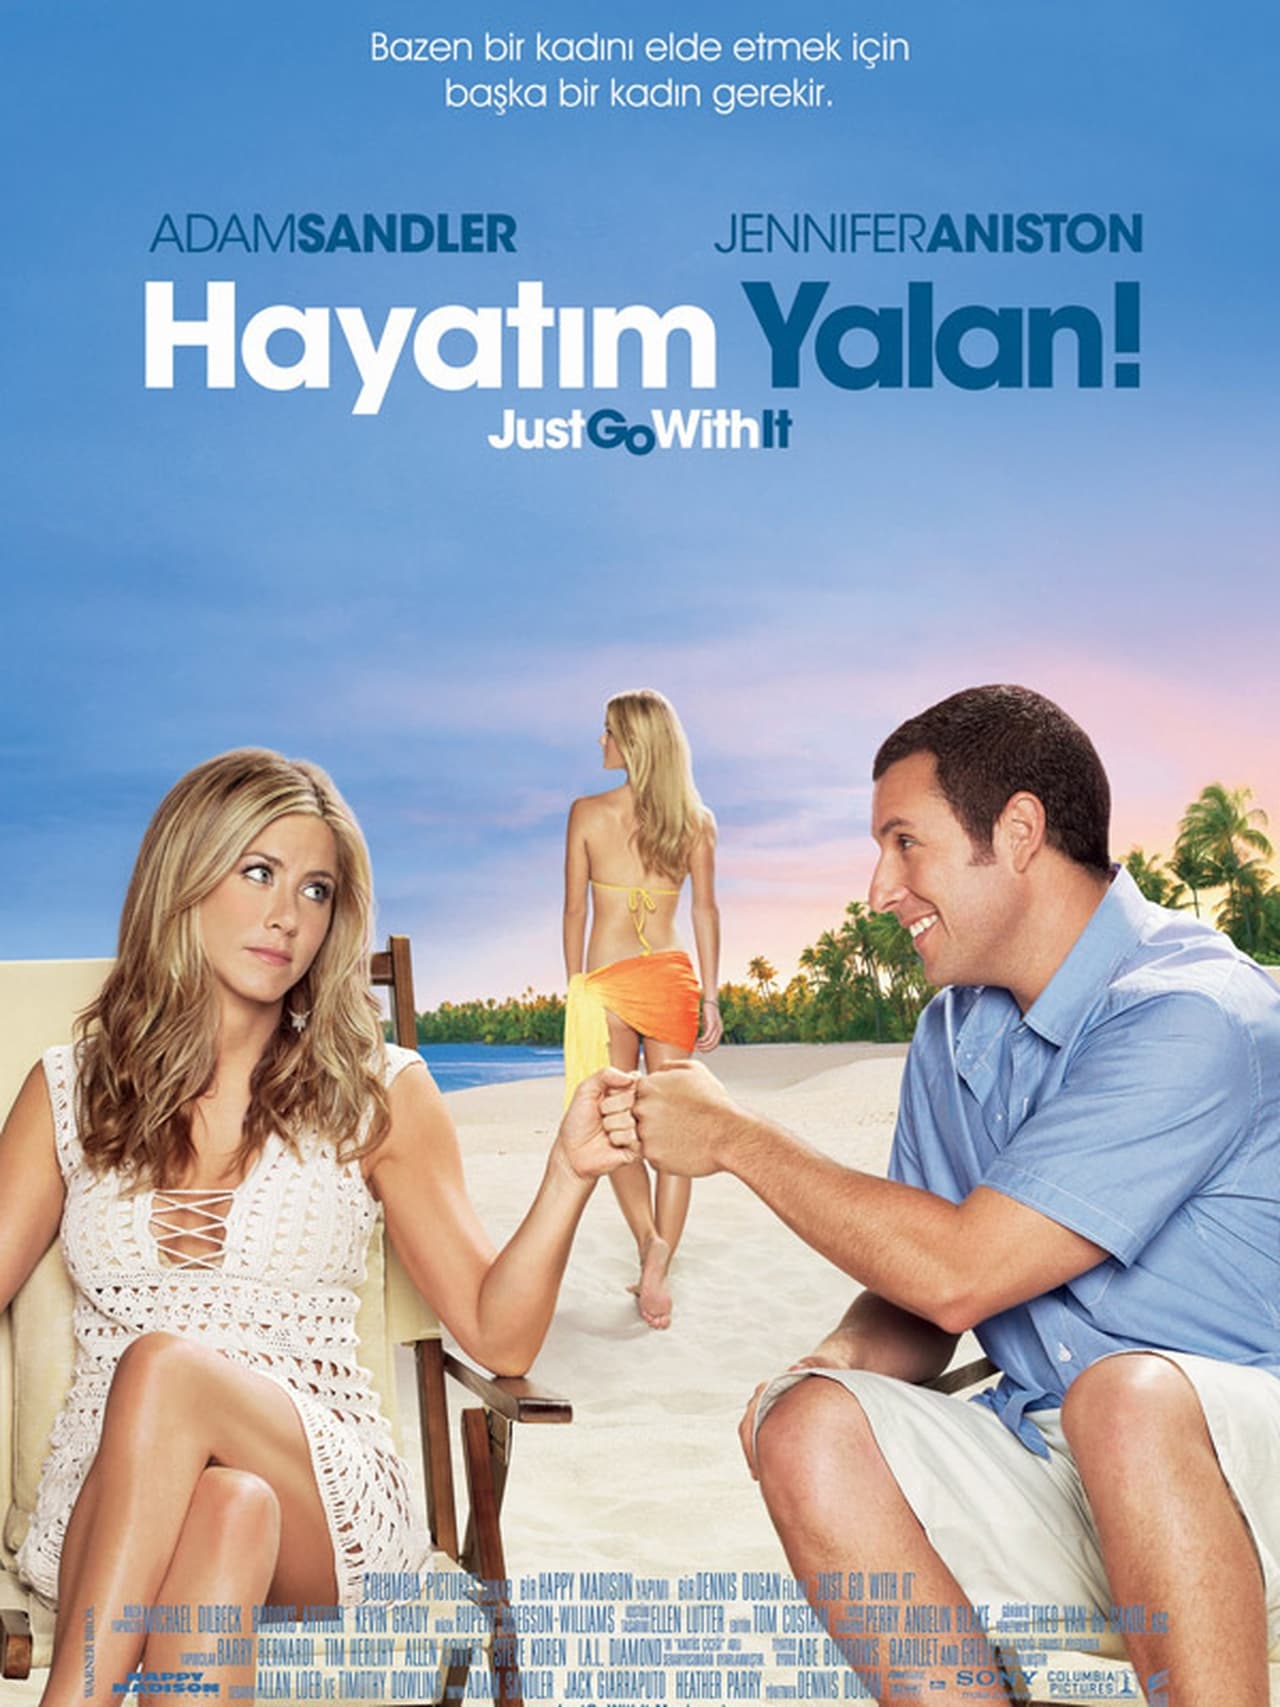 Just Go with It (2011) 640Kbps 23.976Fps 48Khz 5.1Ch DD+ NF E-AC3 Turkish Audio TAC